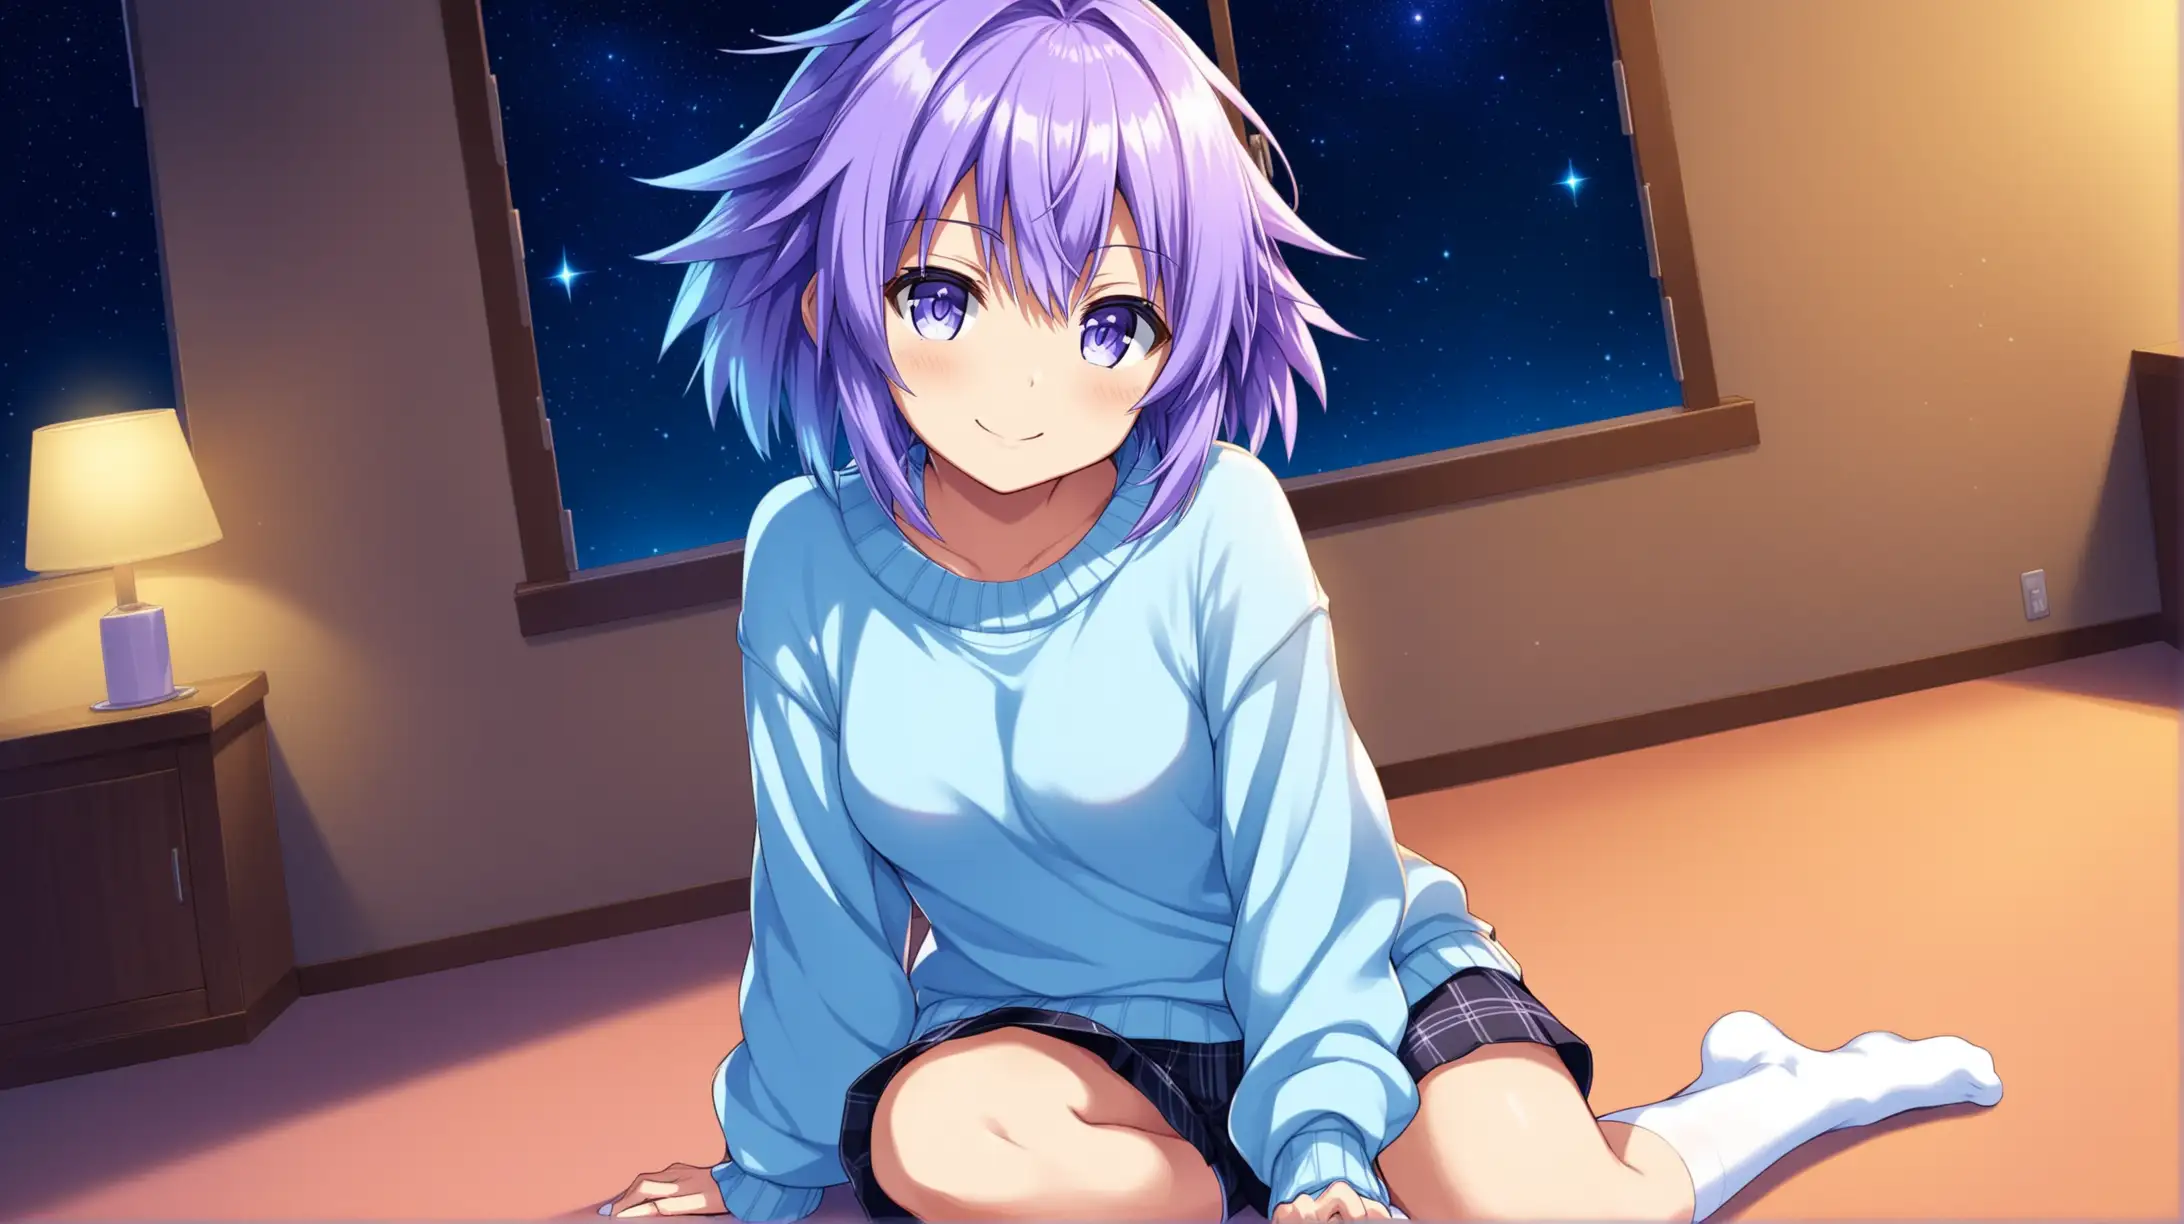 Neptune from Hyperdimension Neptunia Smiling Alone Indoors at Night